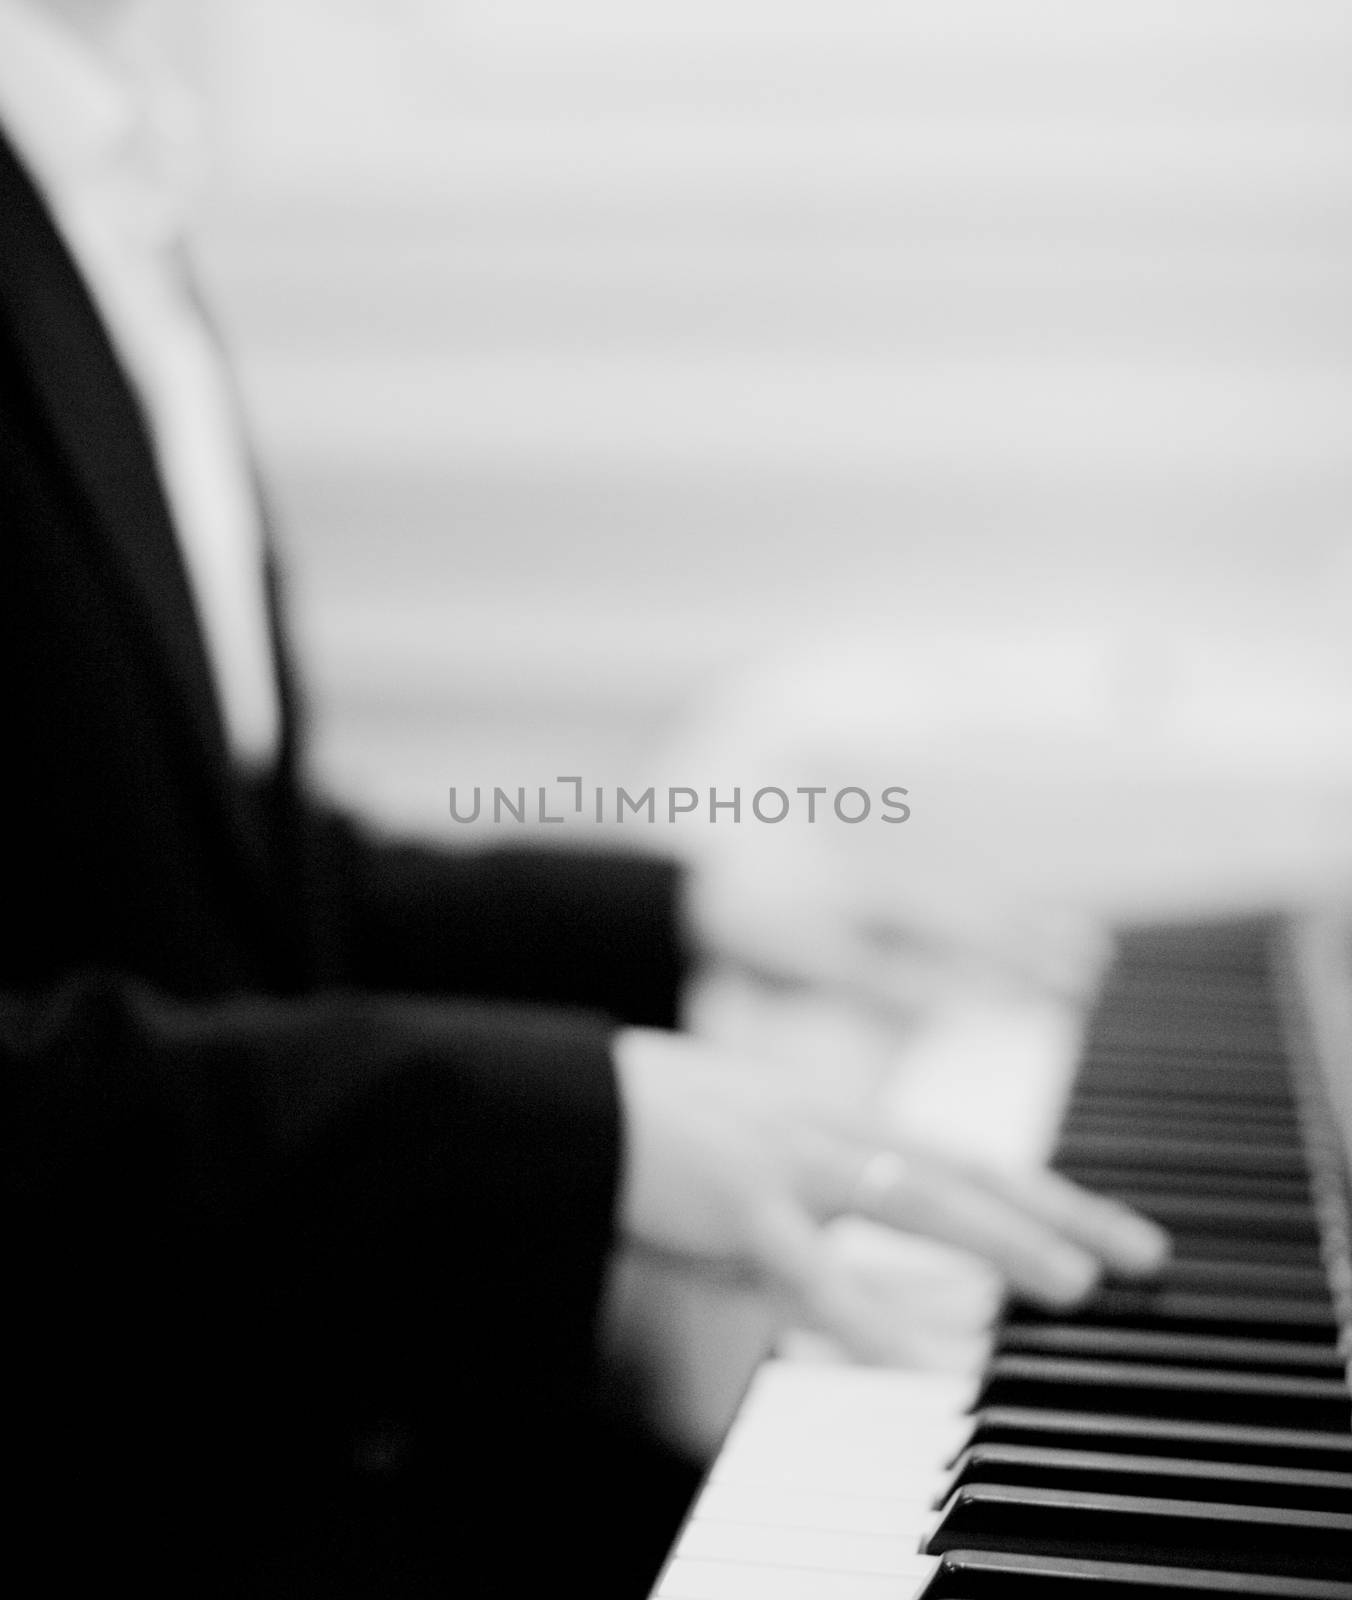 Black and white artistic digital rectangular vertical photo of hand of male pianist playing piano in wedding marriage party in Madrid Spain. Close-up on keys of piano with shallow depth of with background out of focus. 